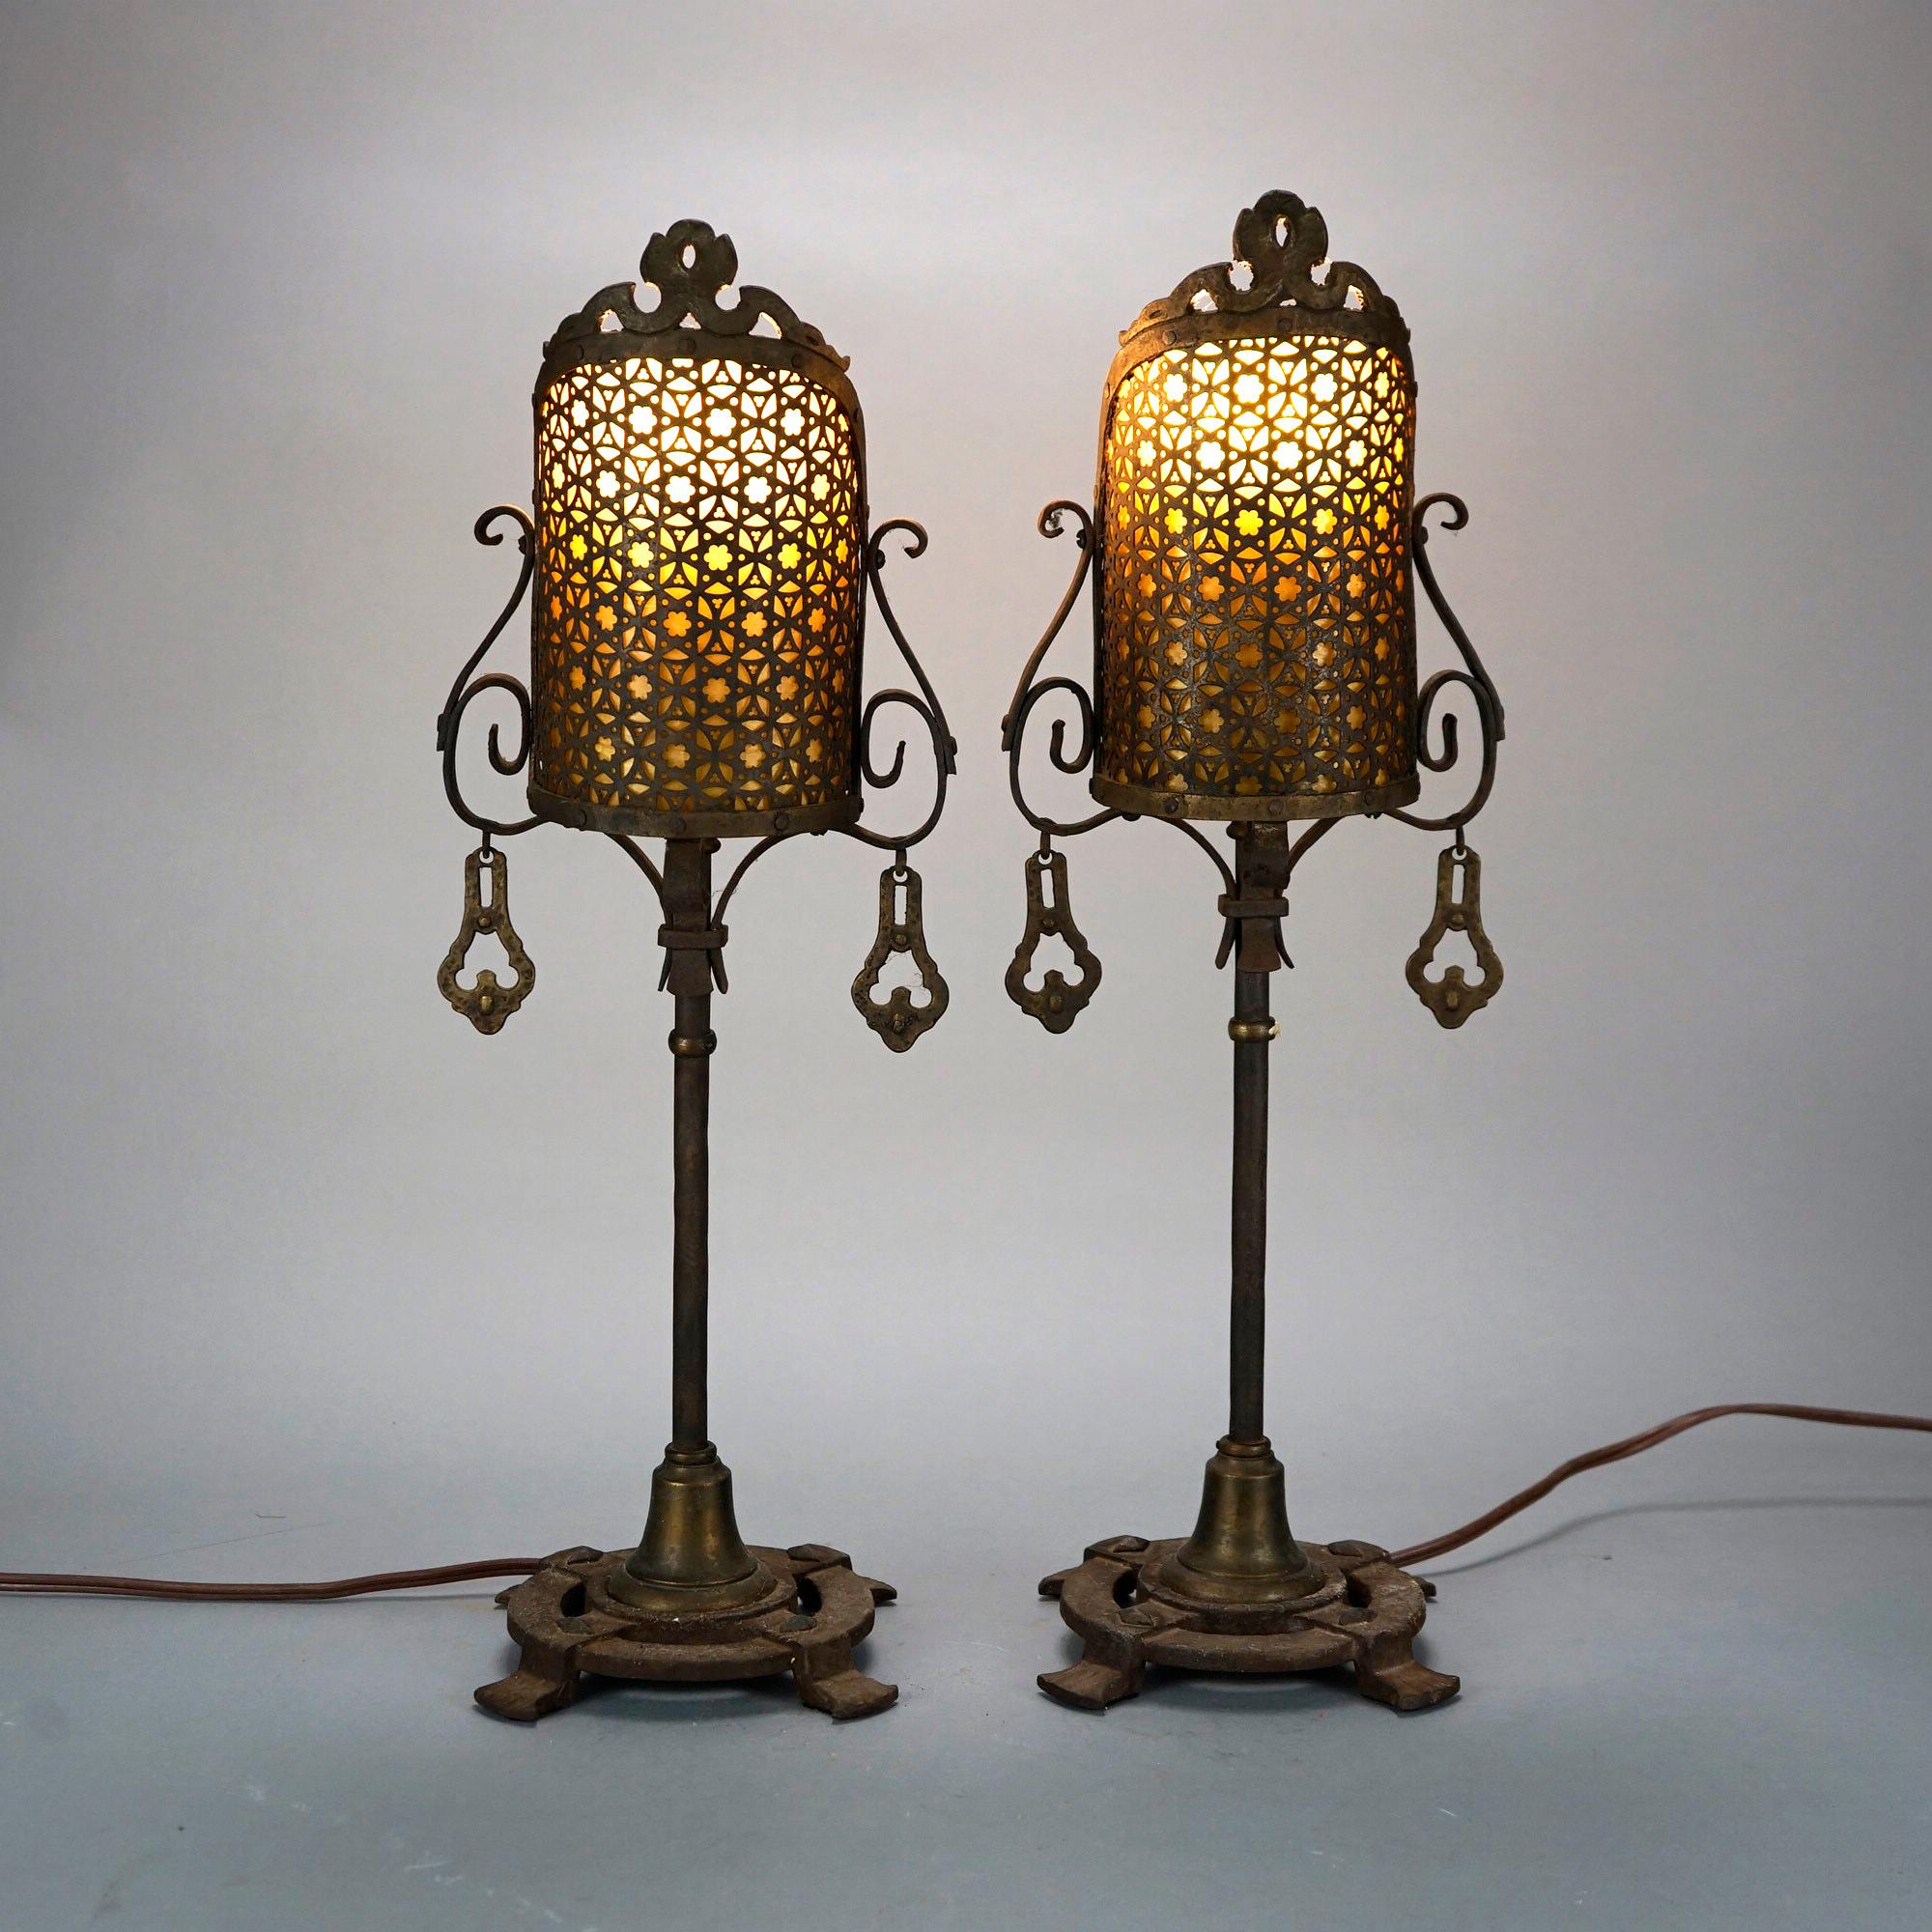 An antique Arts & Crafts pair of accent table lamps offer bronzed and reticulated screens having Moorish design over sing socket cast base with embossed tribal design and base having stylized paw feet, c1920.

Measures- 22.5''H x 7.5''W x